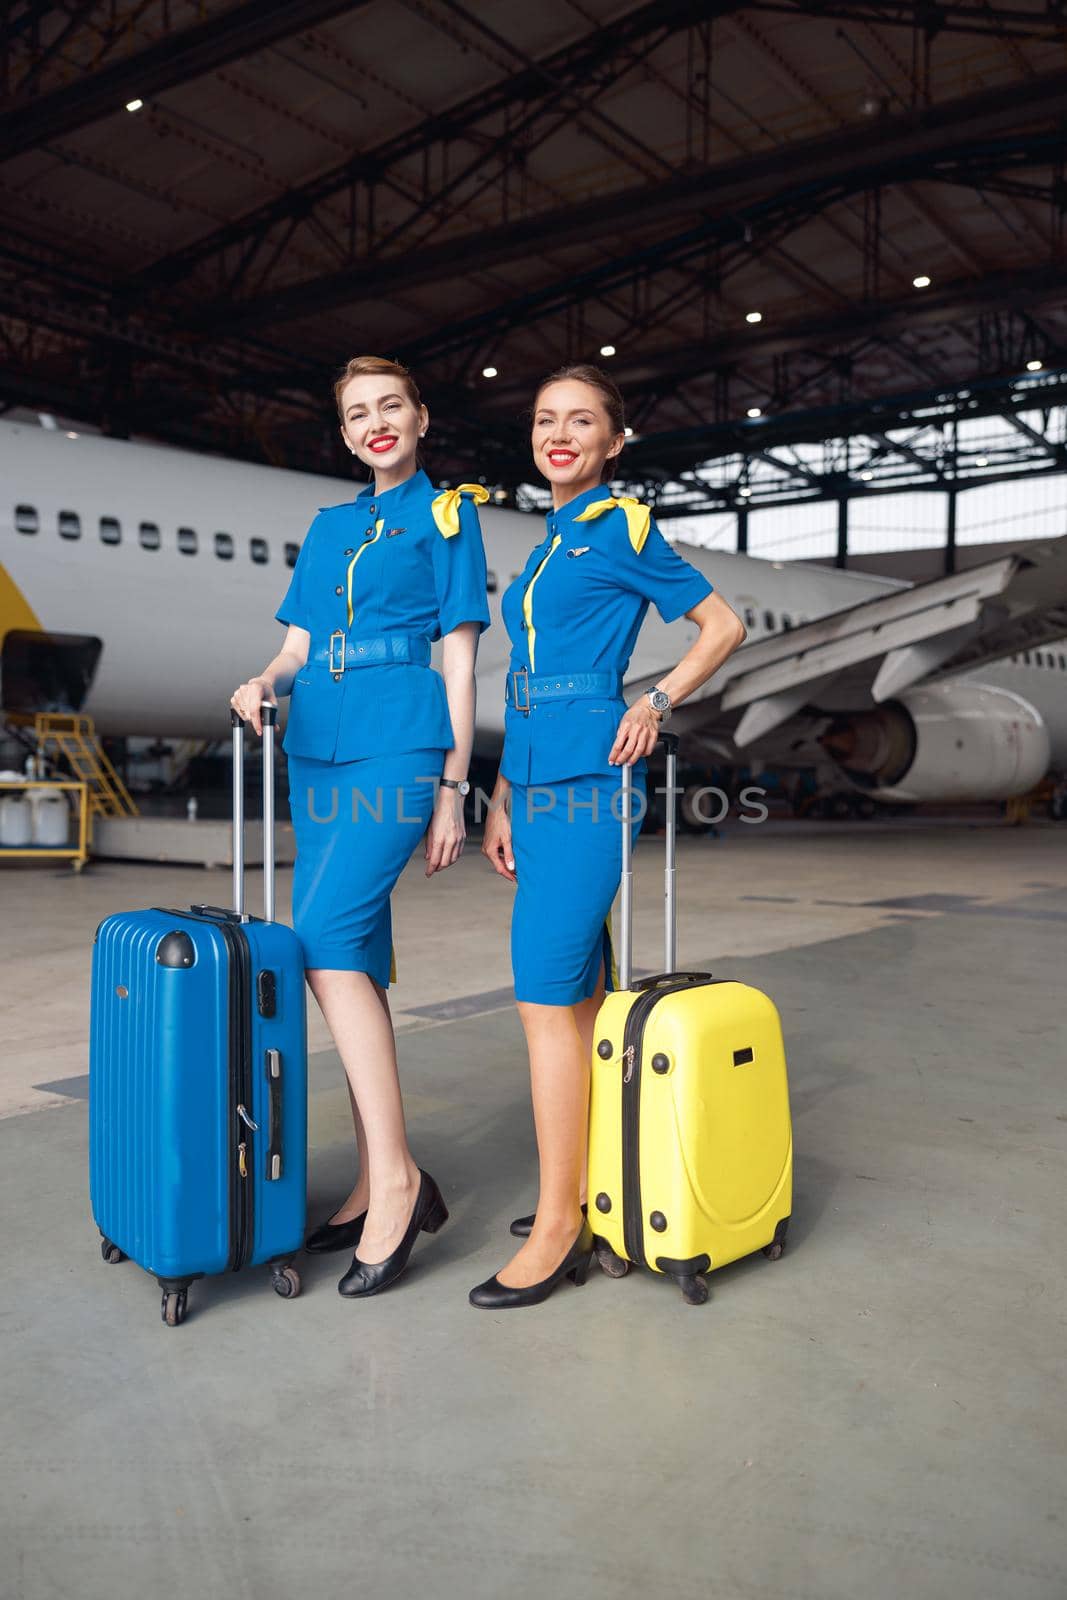 Full length shot of two smiling air stewardesses in bright blue uniform ready for flight, standing with their luggage in front of passenger aircraft in hangar at the airport by Yaroslav_astakhov